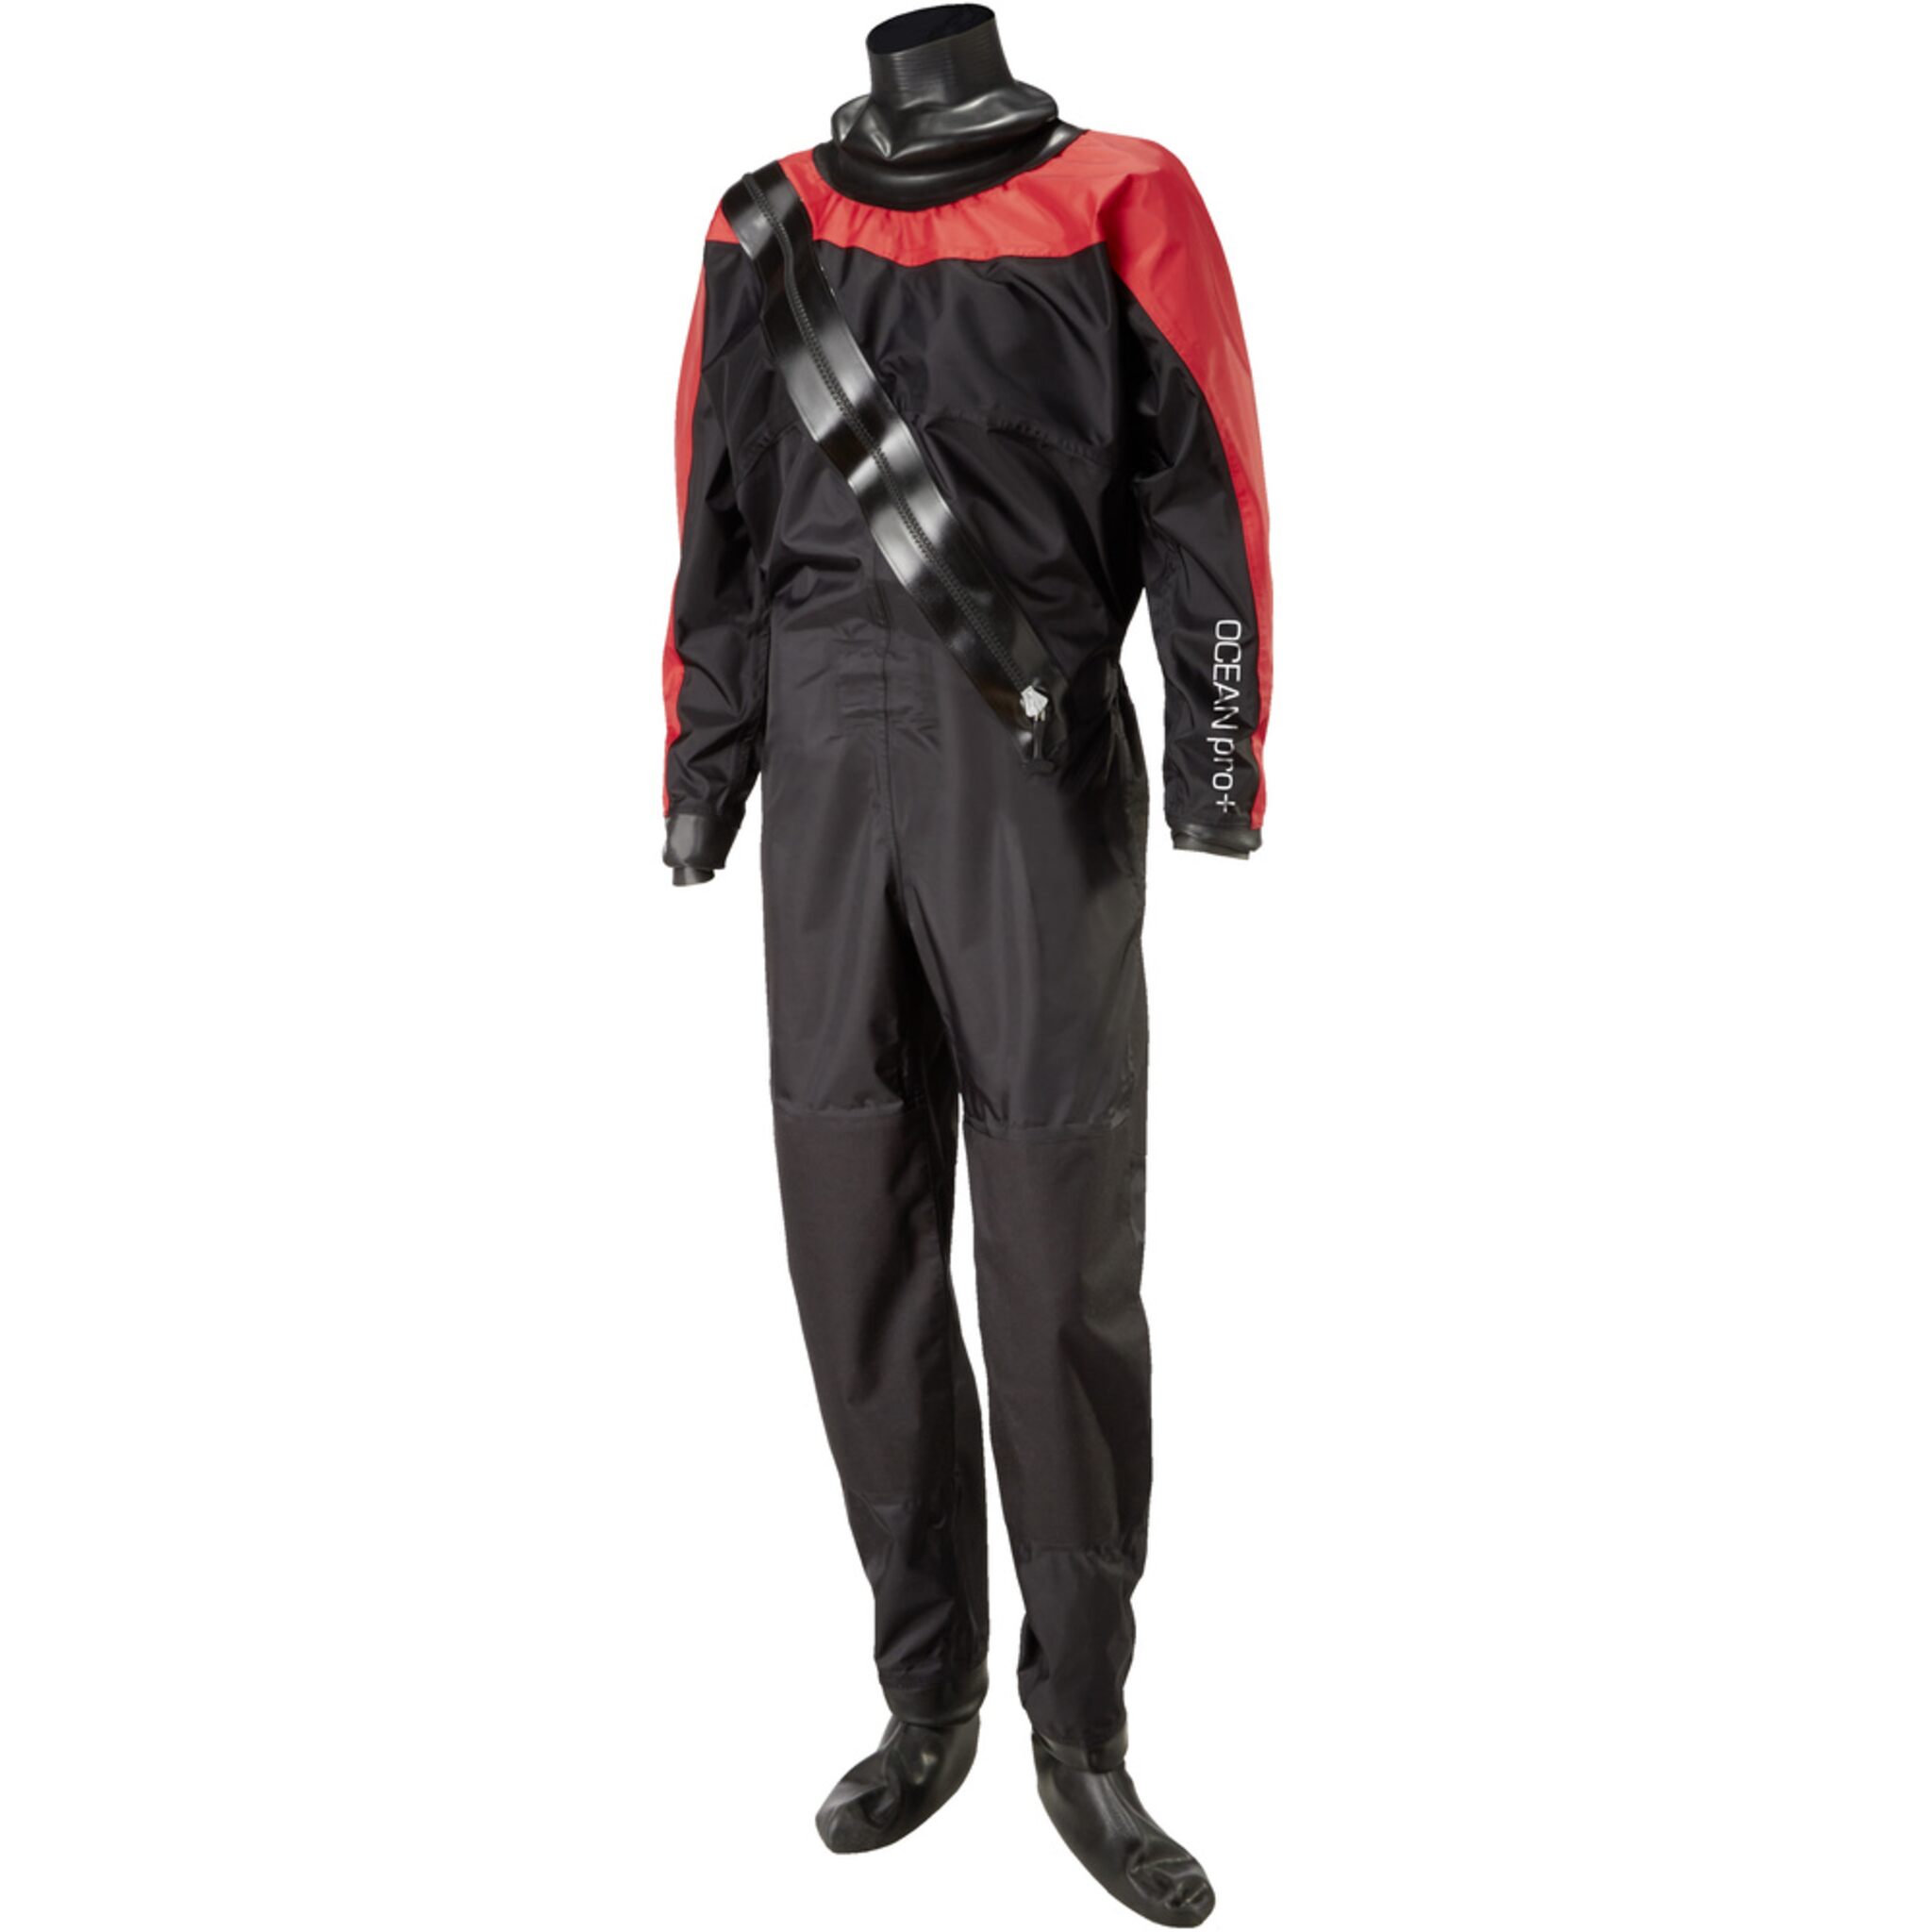 OCEAN pro dry suit with feet for children